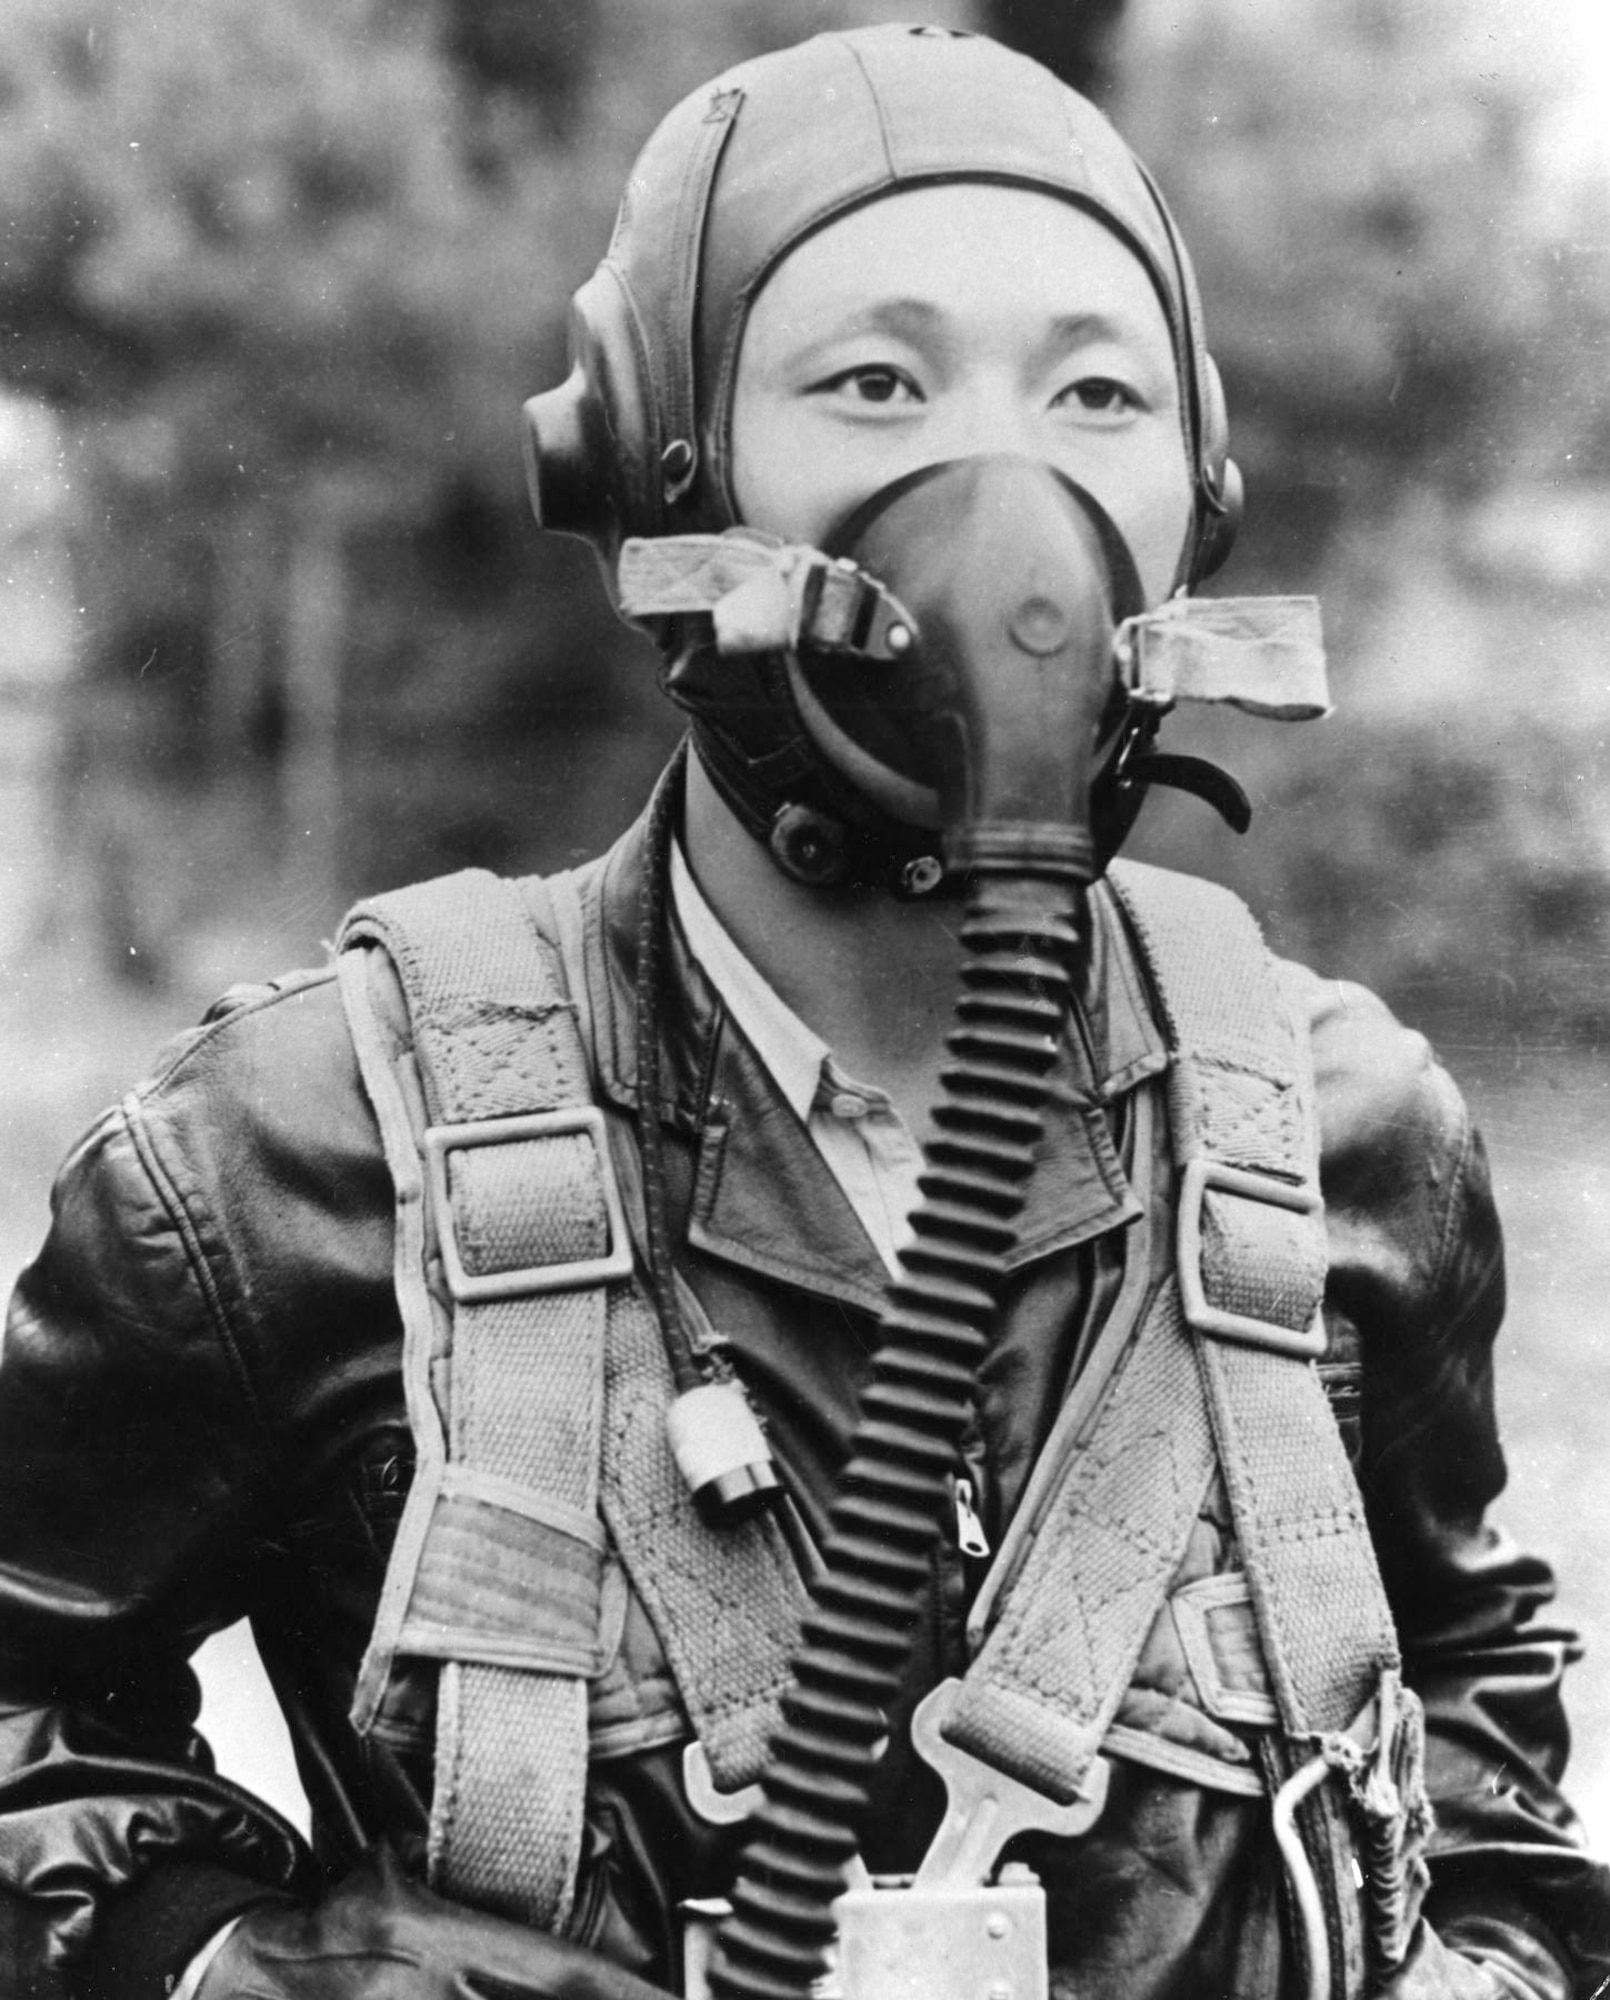 MiG-15 pilot Lt No Kum-Sok, pictured in 1953 wearing typical communist flight clothing. MiG-15 pilots did not wear g-suits or hard-shell helmets. (U.S. Air Force photo)